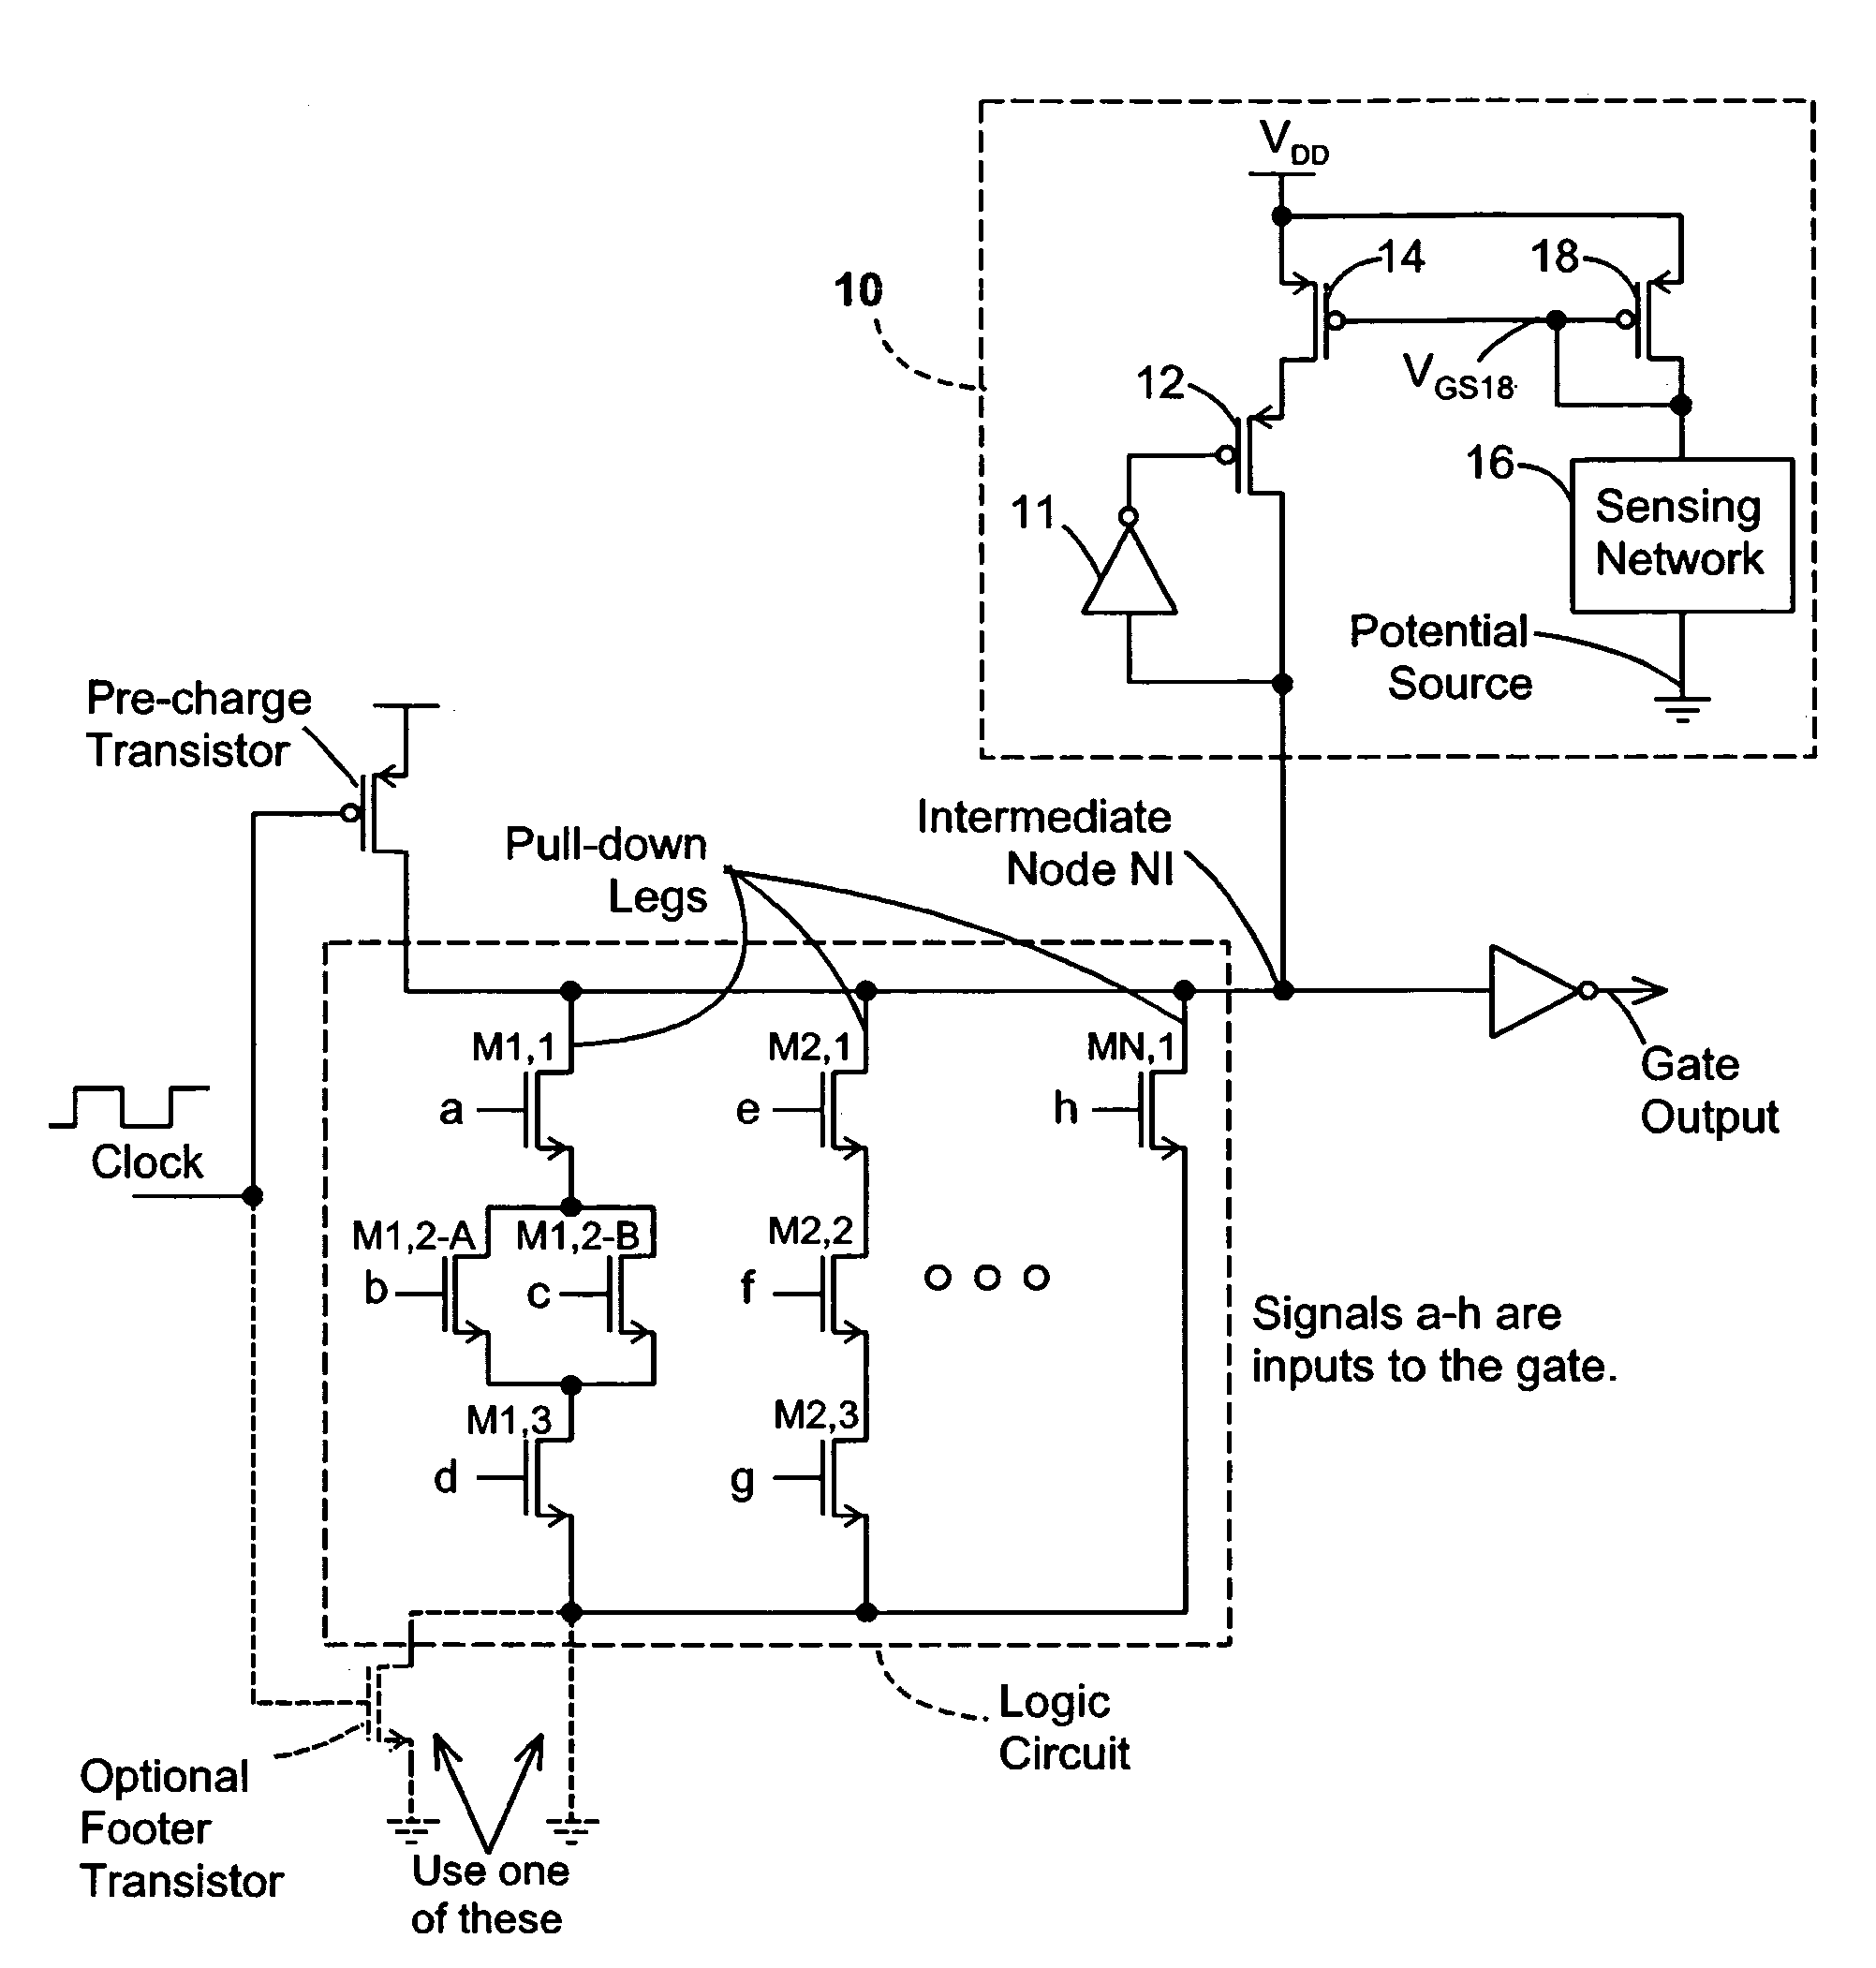 Keeper circuits having dynamic leakage compensation